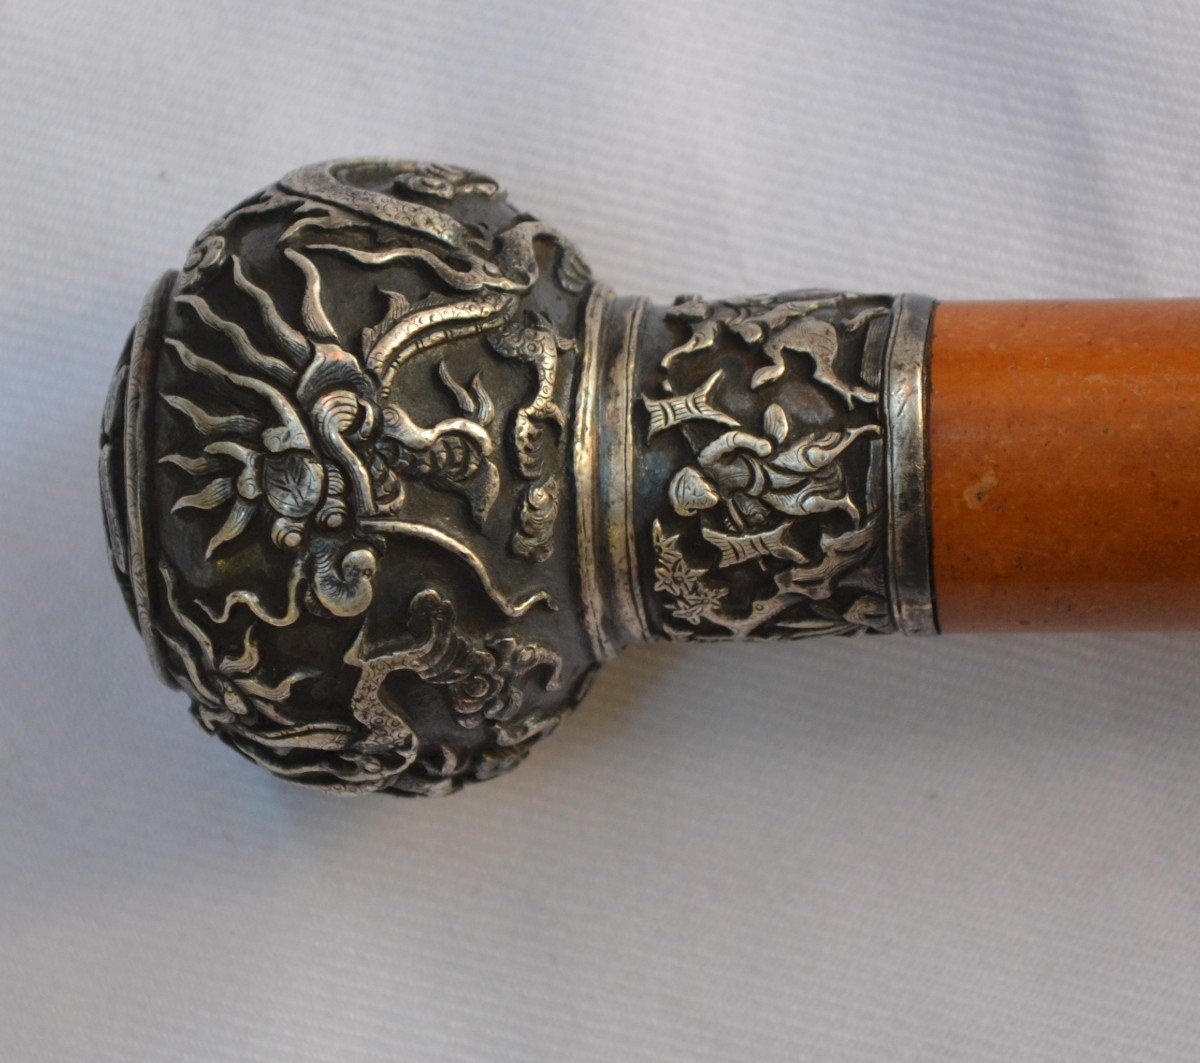 Cane In Cast Silver, Chiseled With Dragons. Shaft In Huang-hualy. China Or Vietnam 19° Century.-photo-4